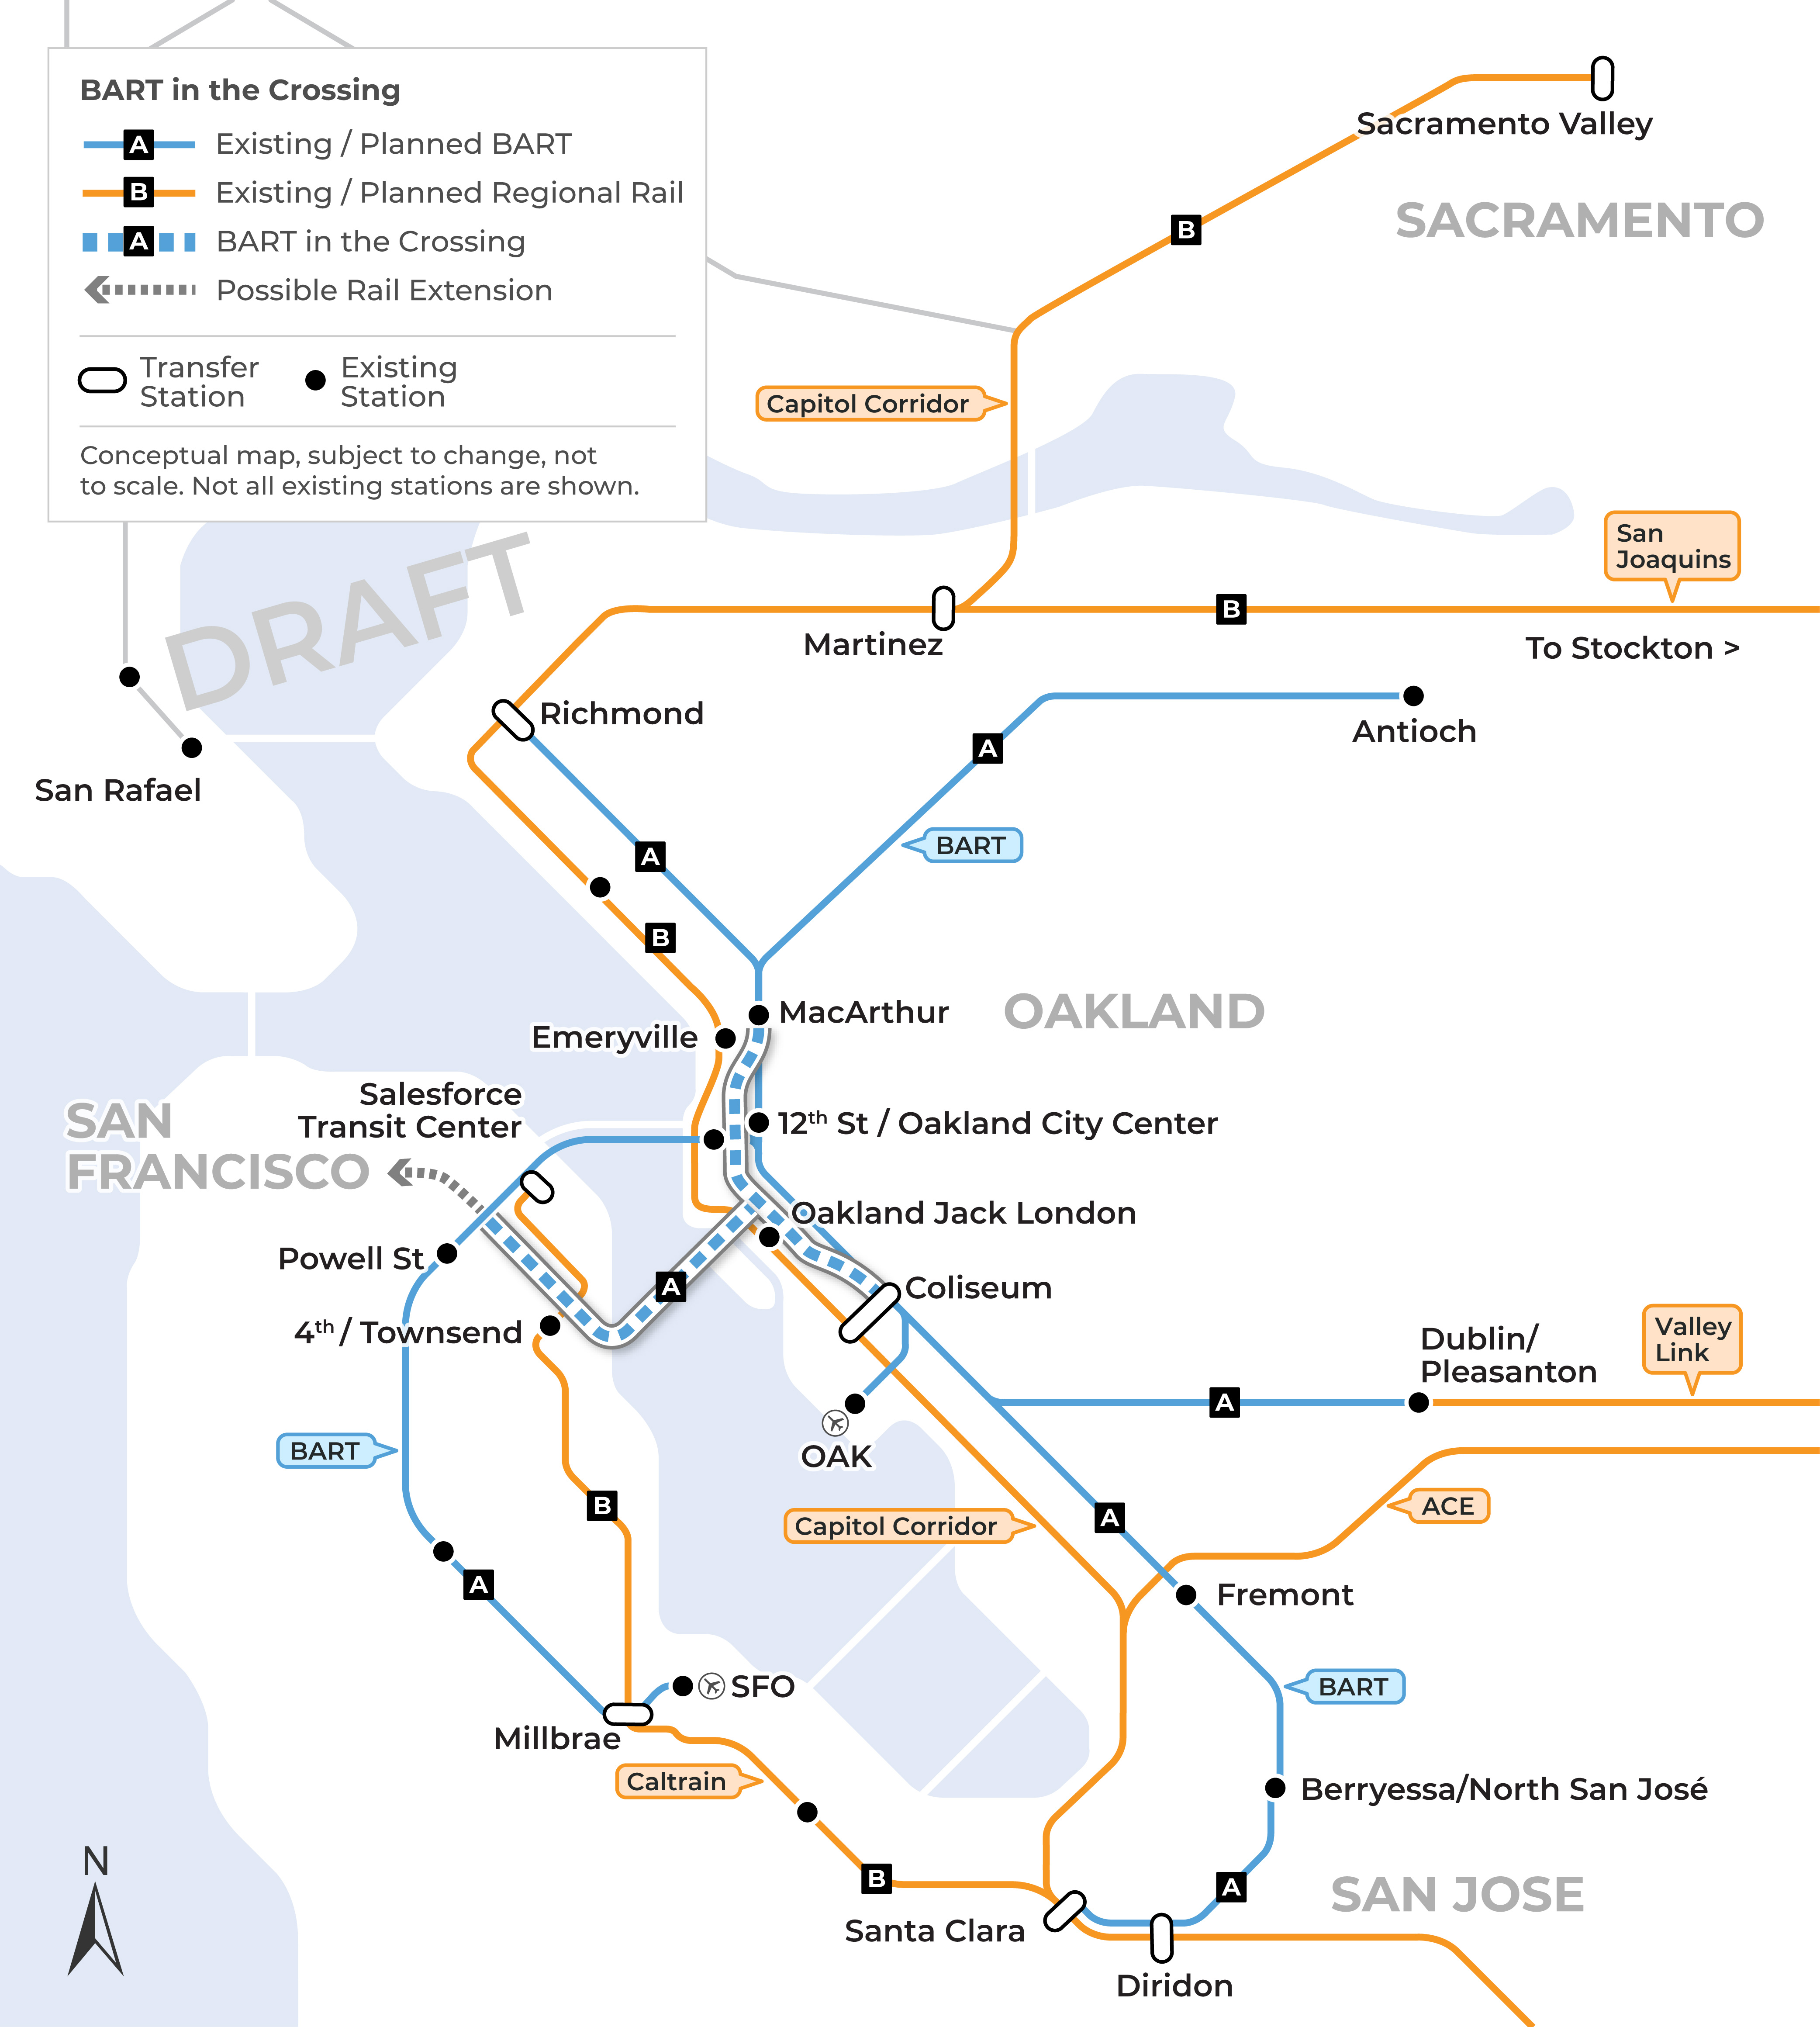 A map of BART service in Northern California. BART in the Crossing map legend includes existing and planned BART routes, existing and planned Regional Rail routes. The BART in the crossing goes from MacArthur to Coliseum with a connector from Oakland Jack London to the Salesforce Transit Center. The legend also includes possible rail extension routes and both transfer stations and existing stations. Not all existing stations are shown.
                                                                 